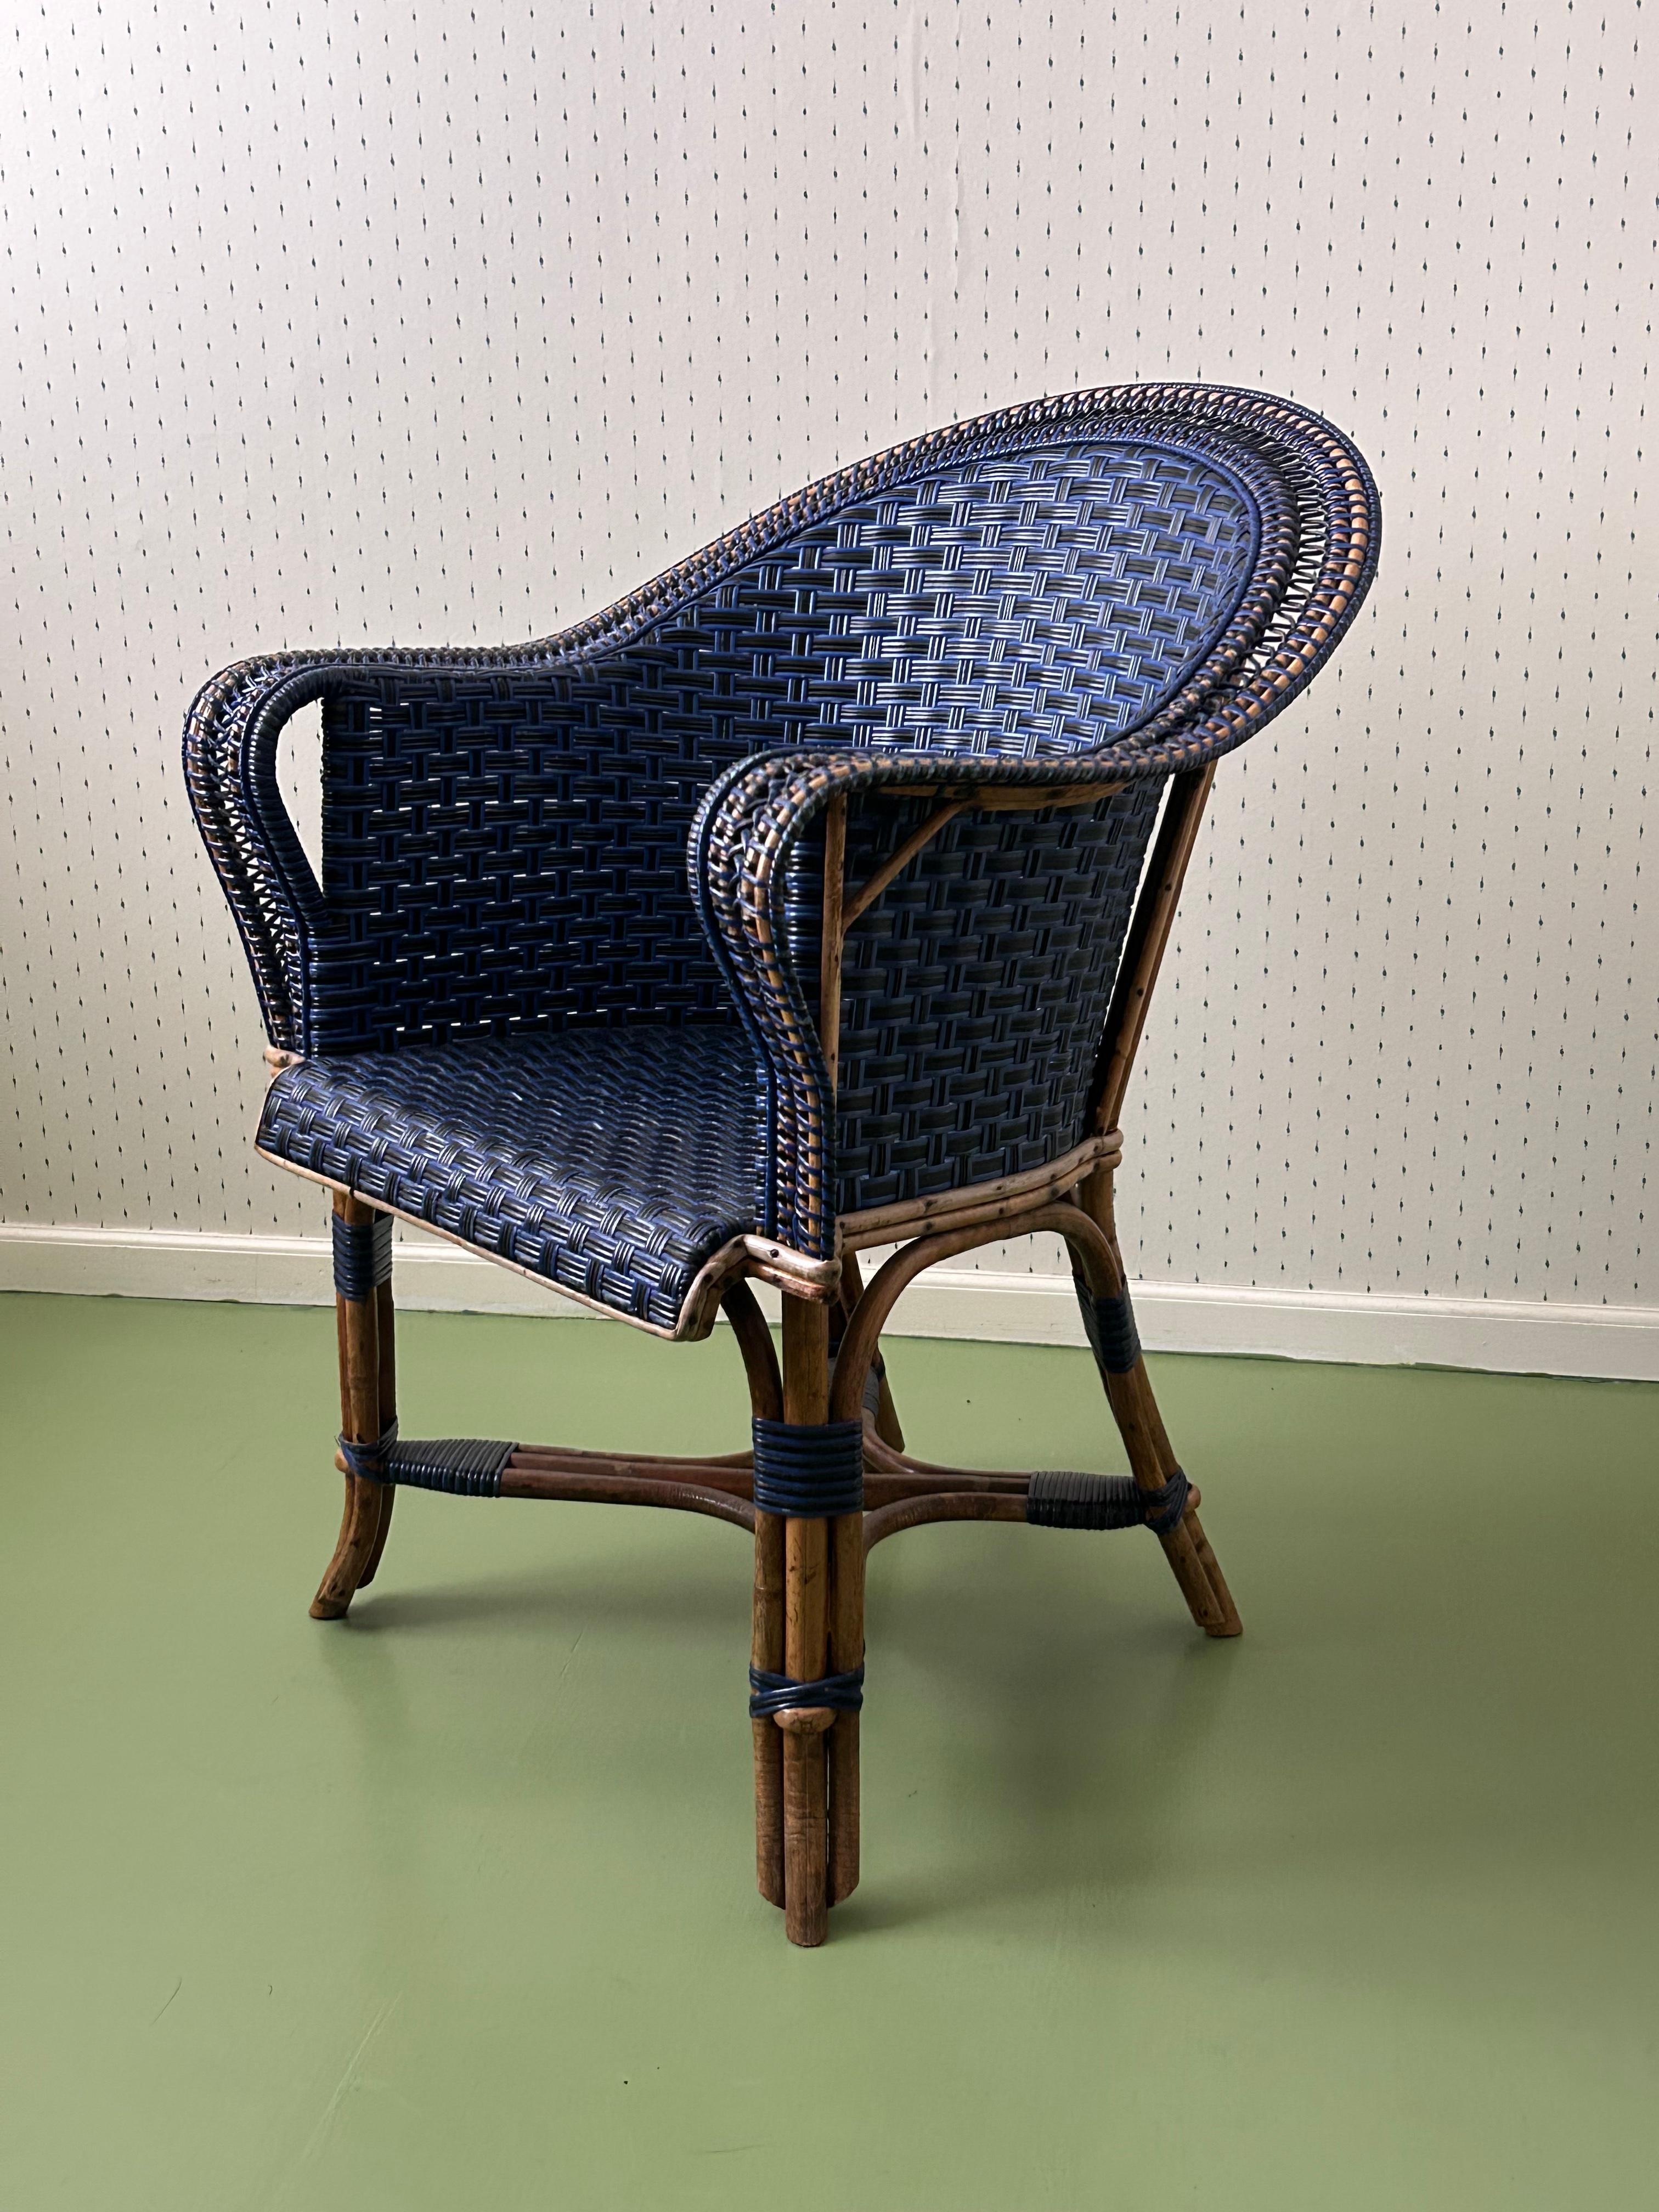 Vintage Rattan Chair in Black and Blue, France, Early 20th Century For Sale 1